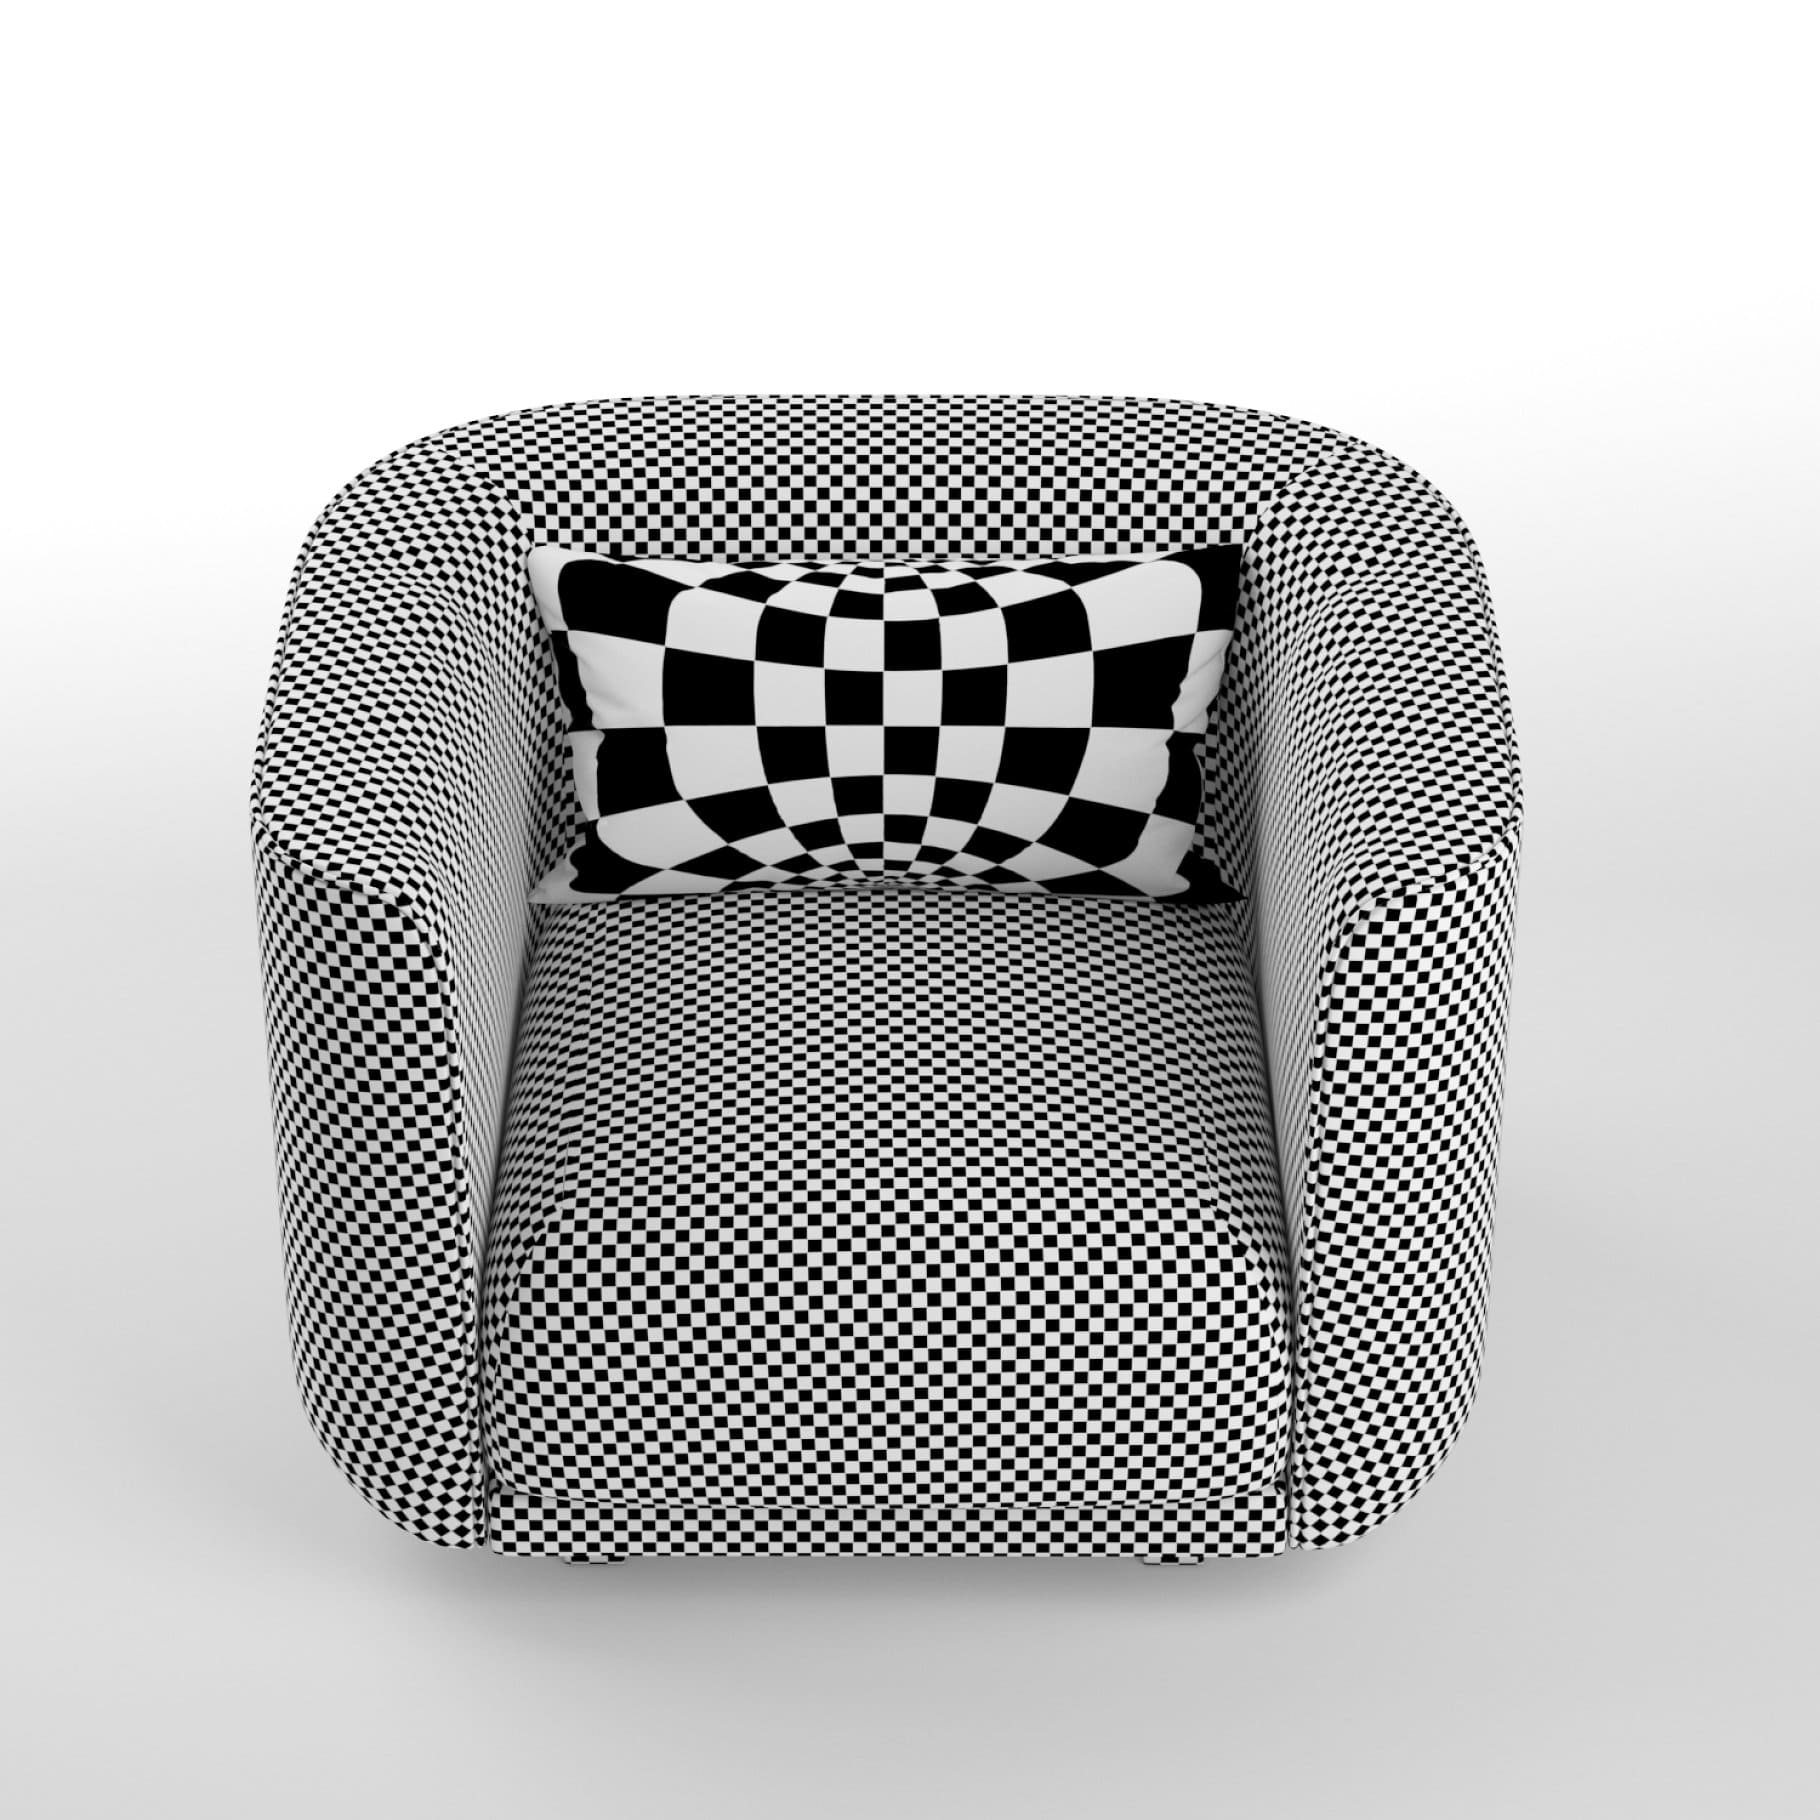 Fat Tulip Arm Chair model with rectangular cushion with checkerboard upholstery.